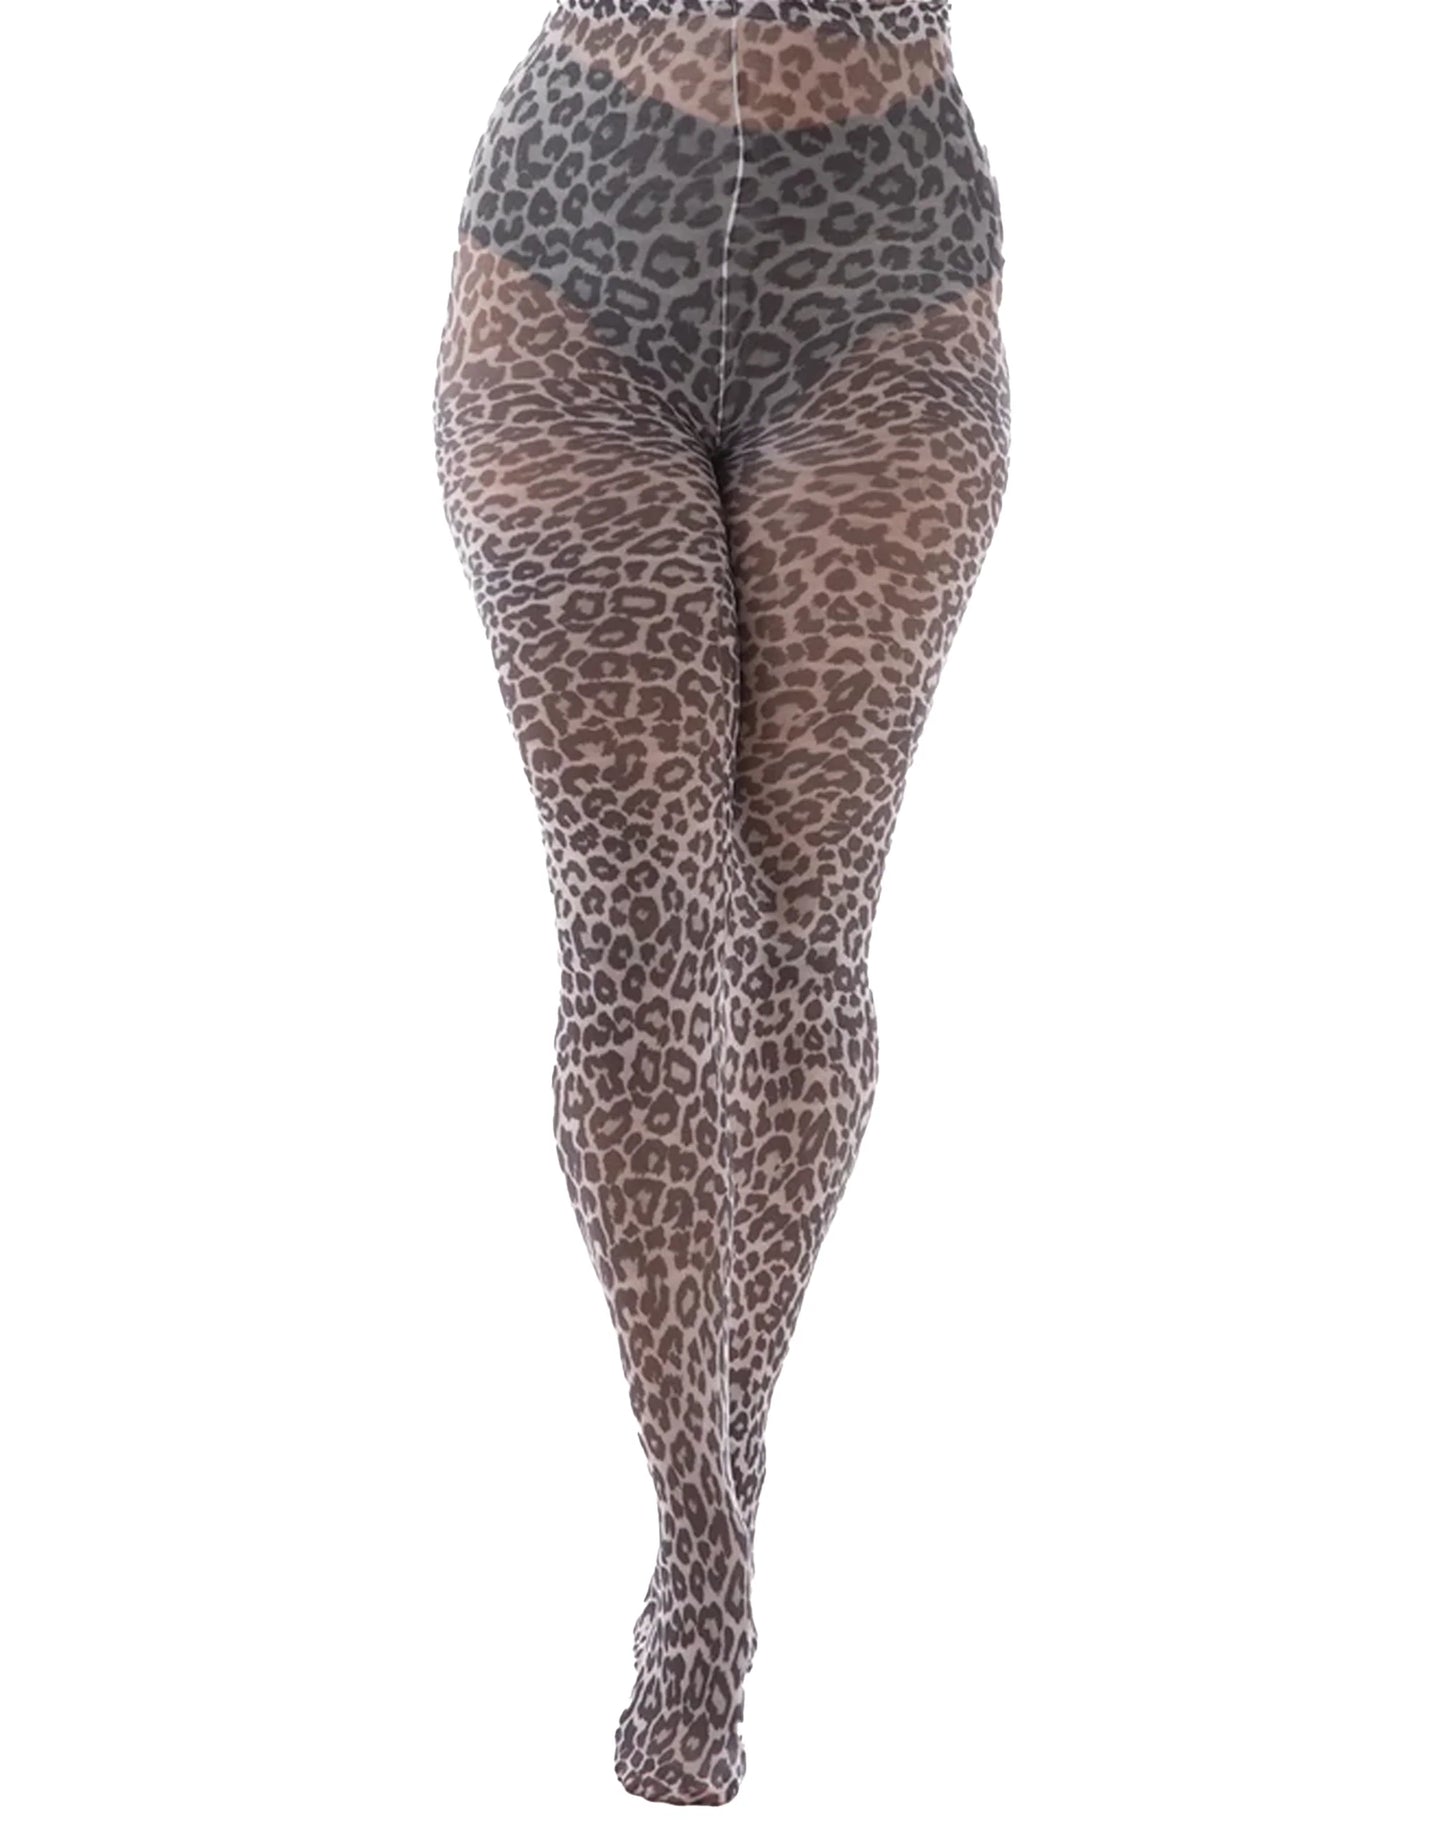 Small Leopard Printed Tights - One Size - Pamela Mann